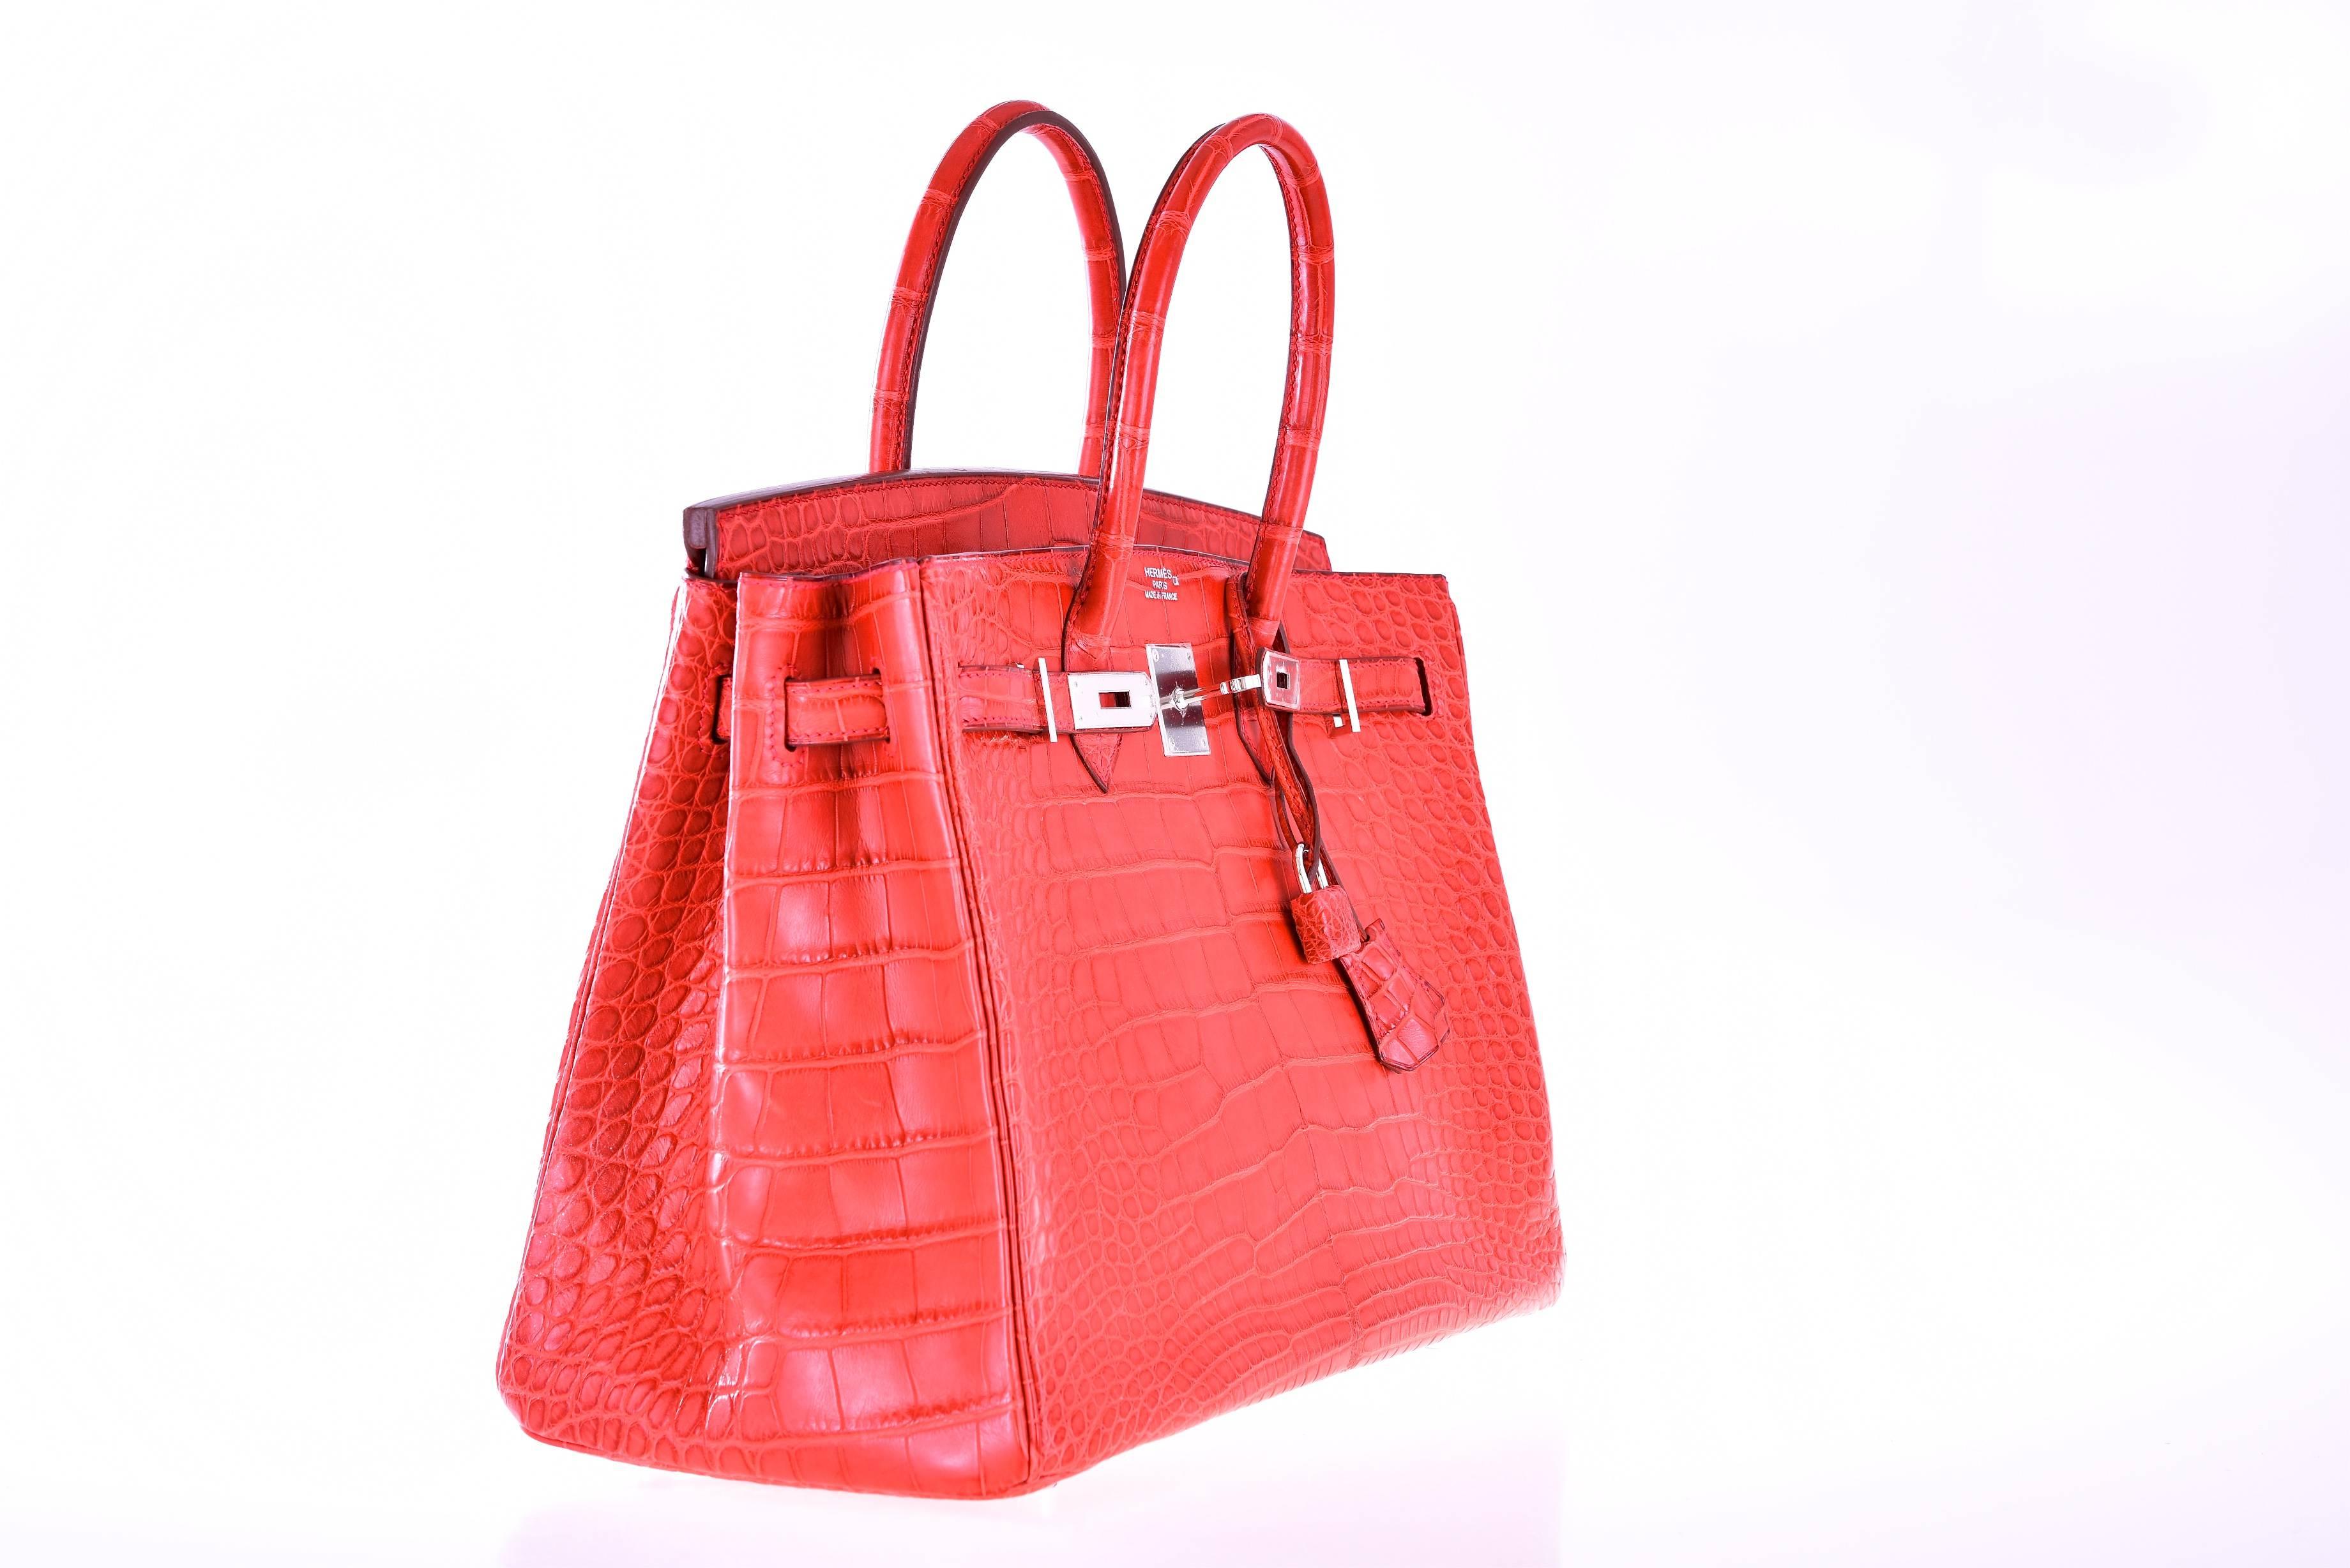 Hermes Birkin Bag 35cm Rouge Indian

This is a very special color and combination. Bag is absolutely brand new, taken out of the box only for photos.

Hermes Birkin 35cm in the most magical Rouge Indian Alligator with palladium hardware.

The color